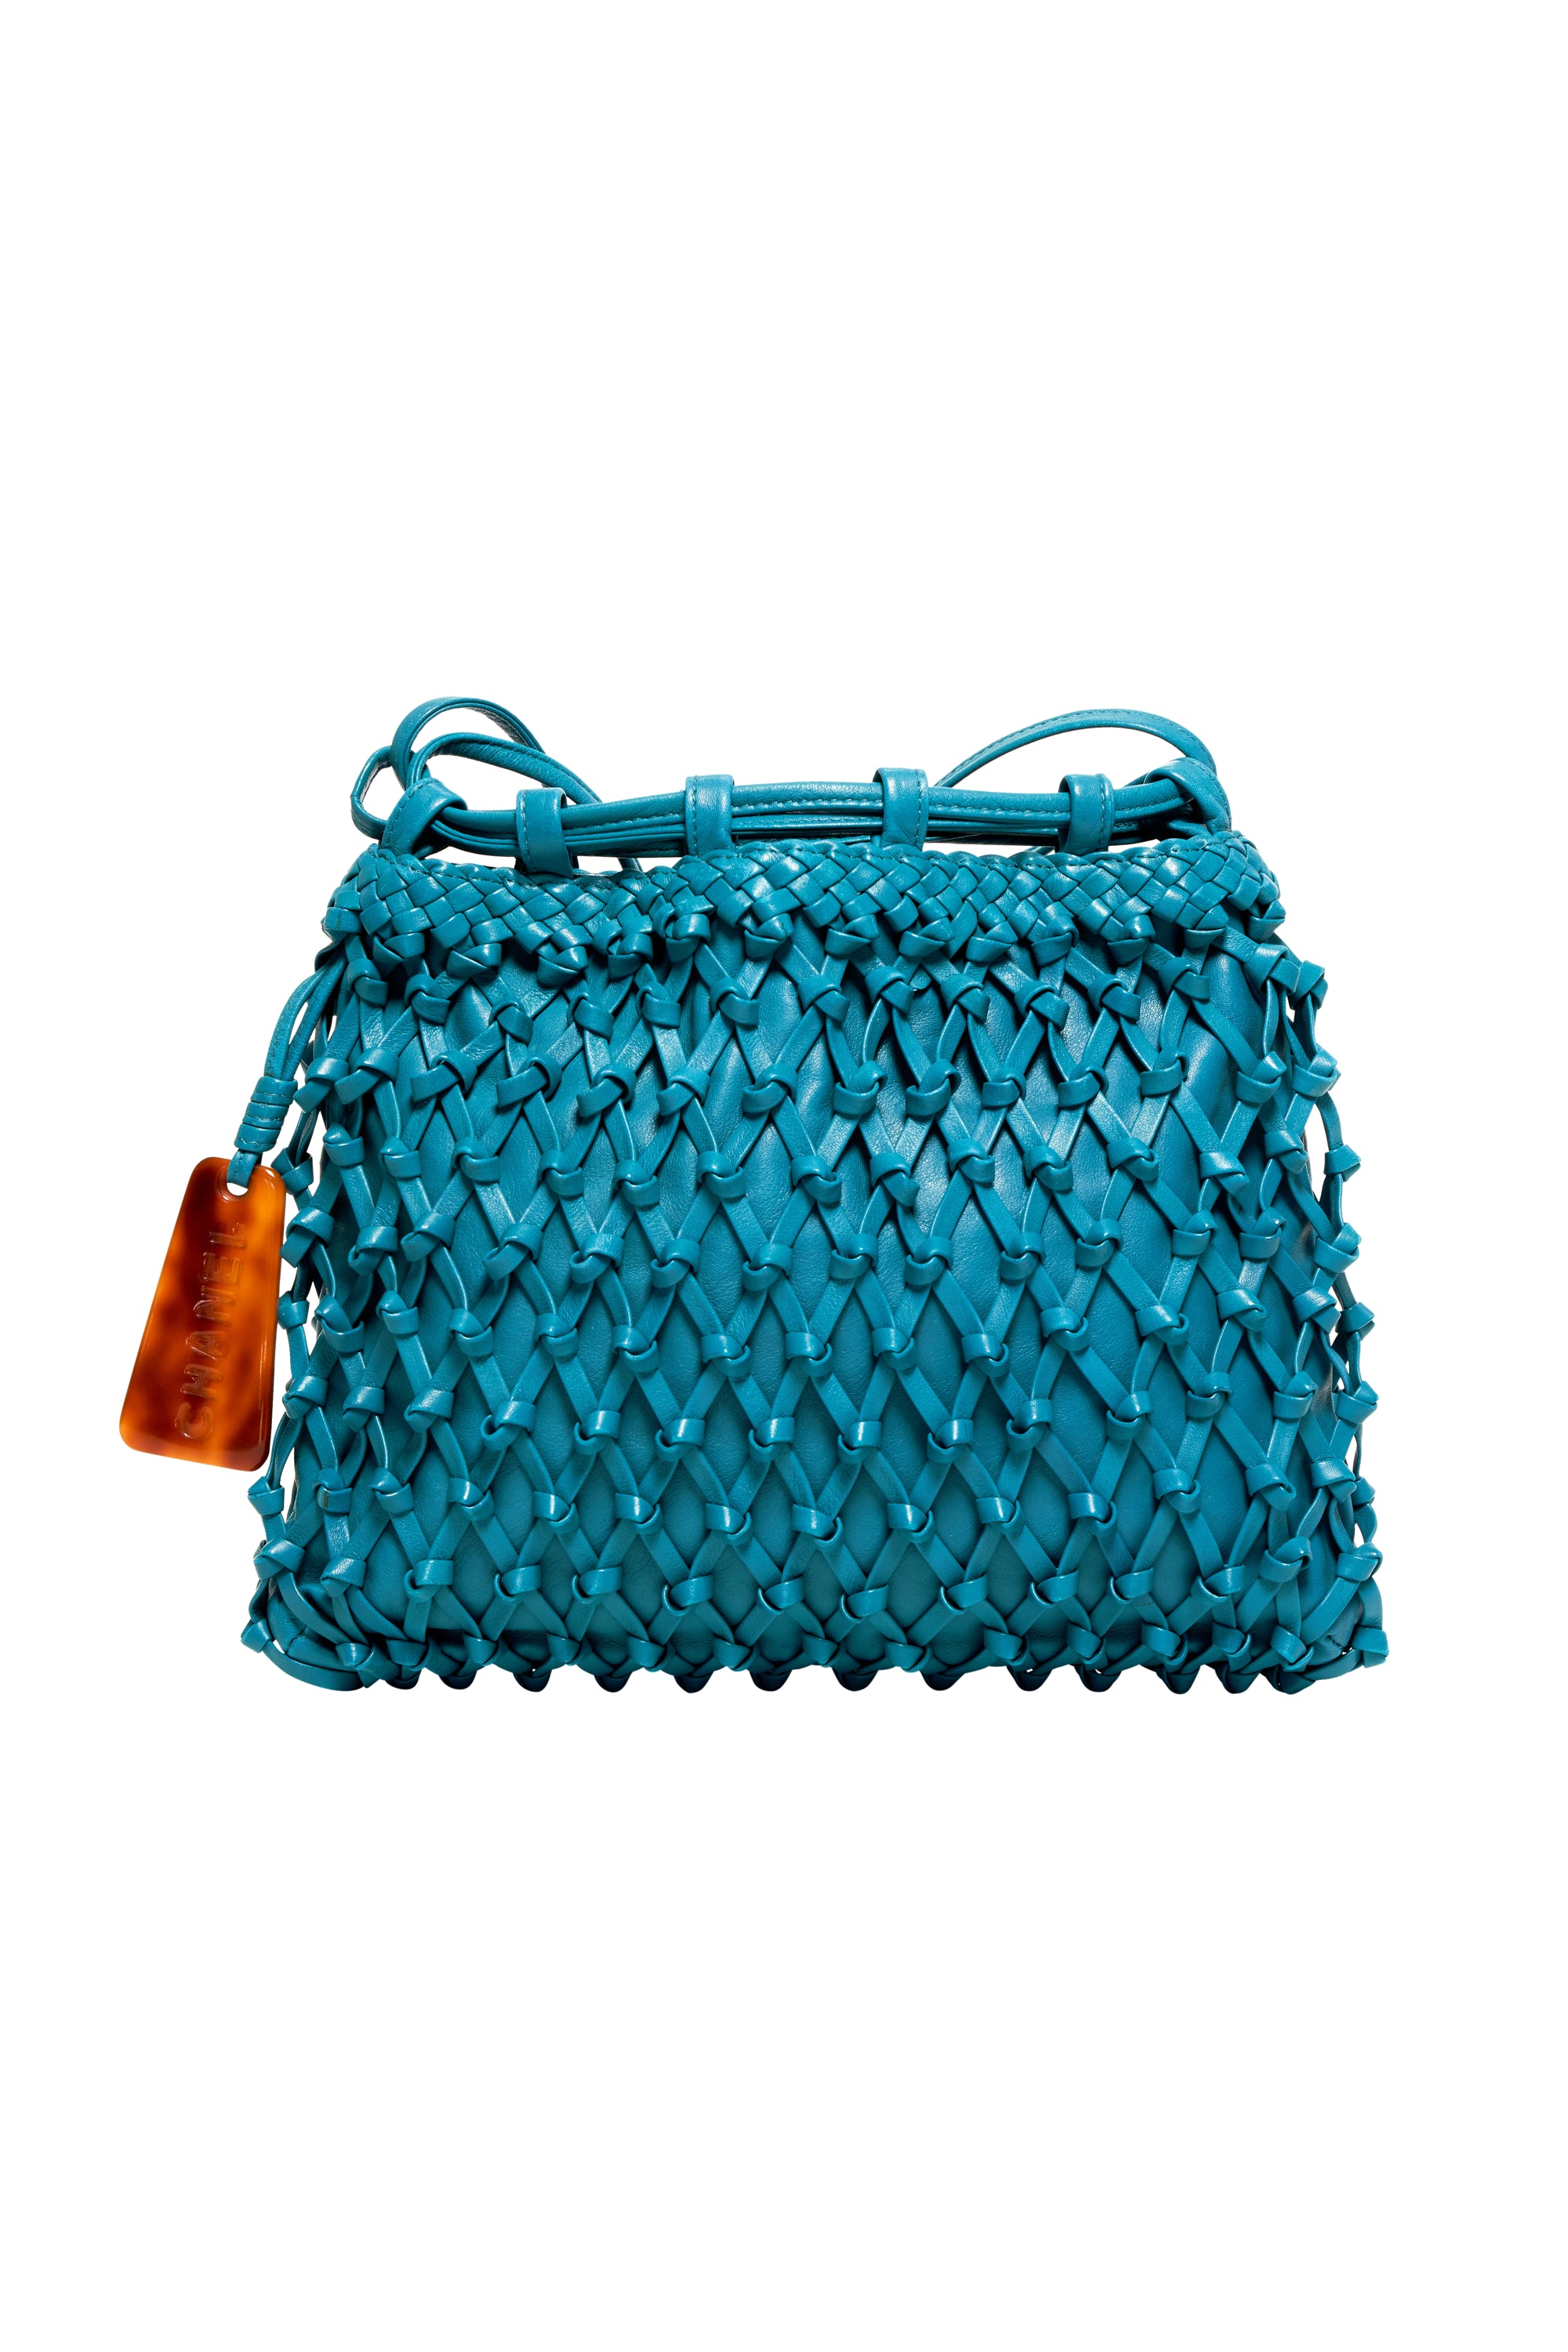 Chanel Knotted Leather Teal Purse